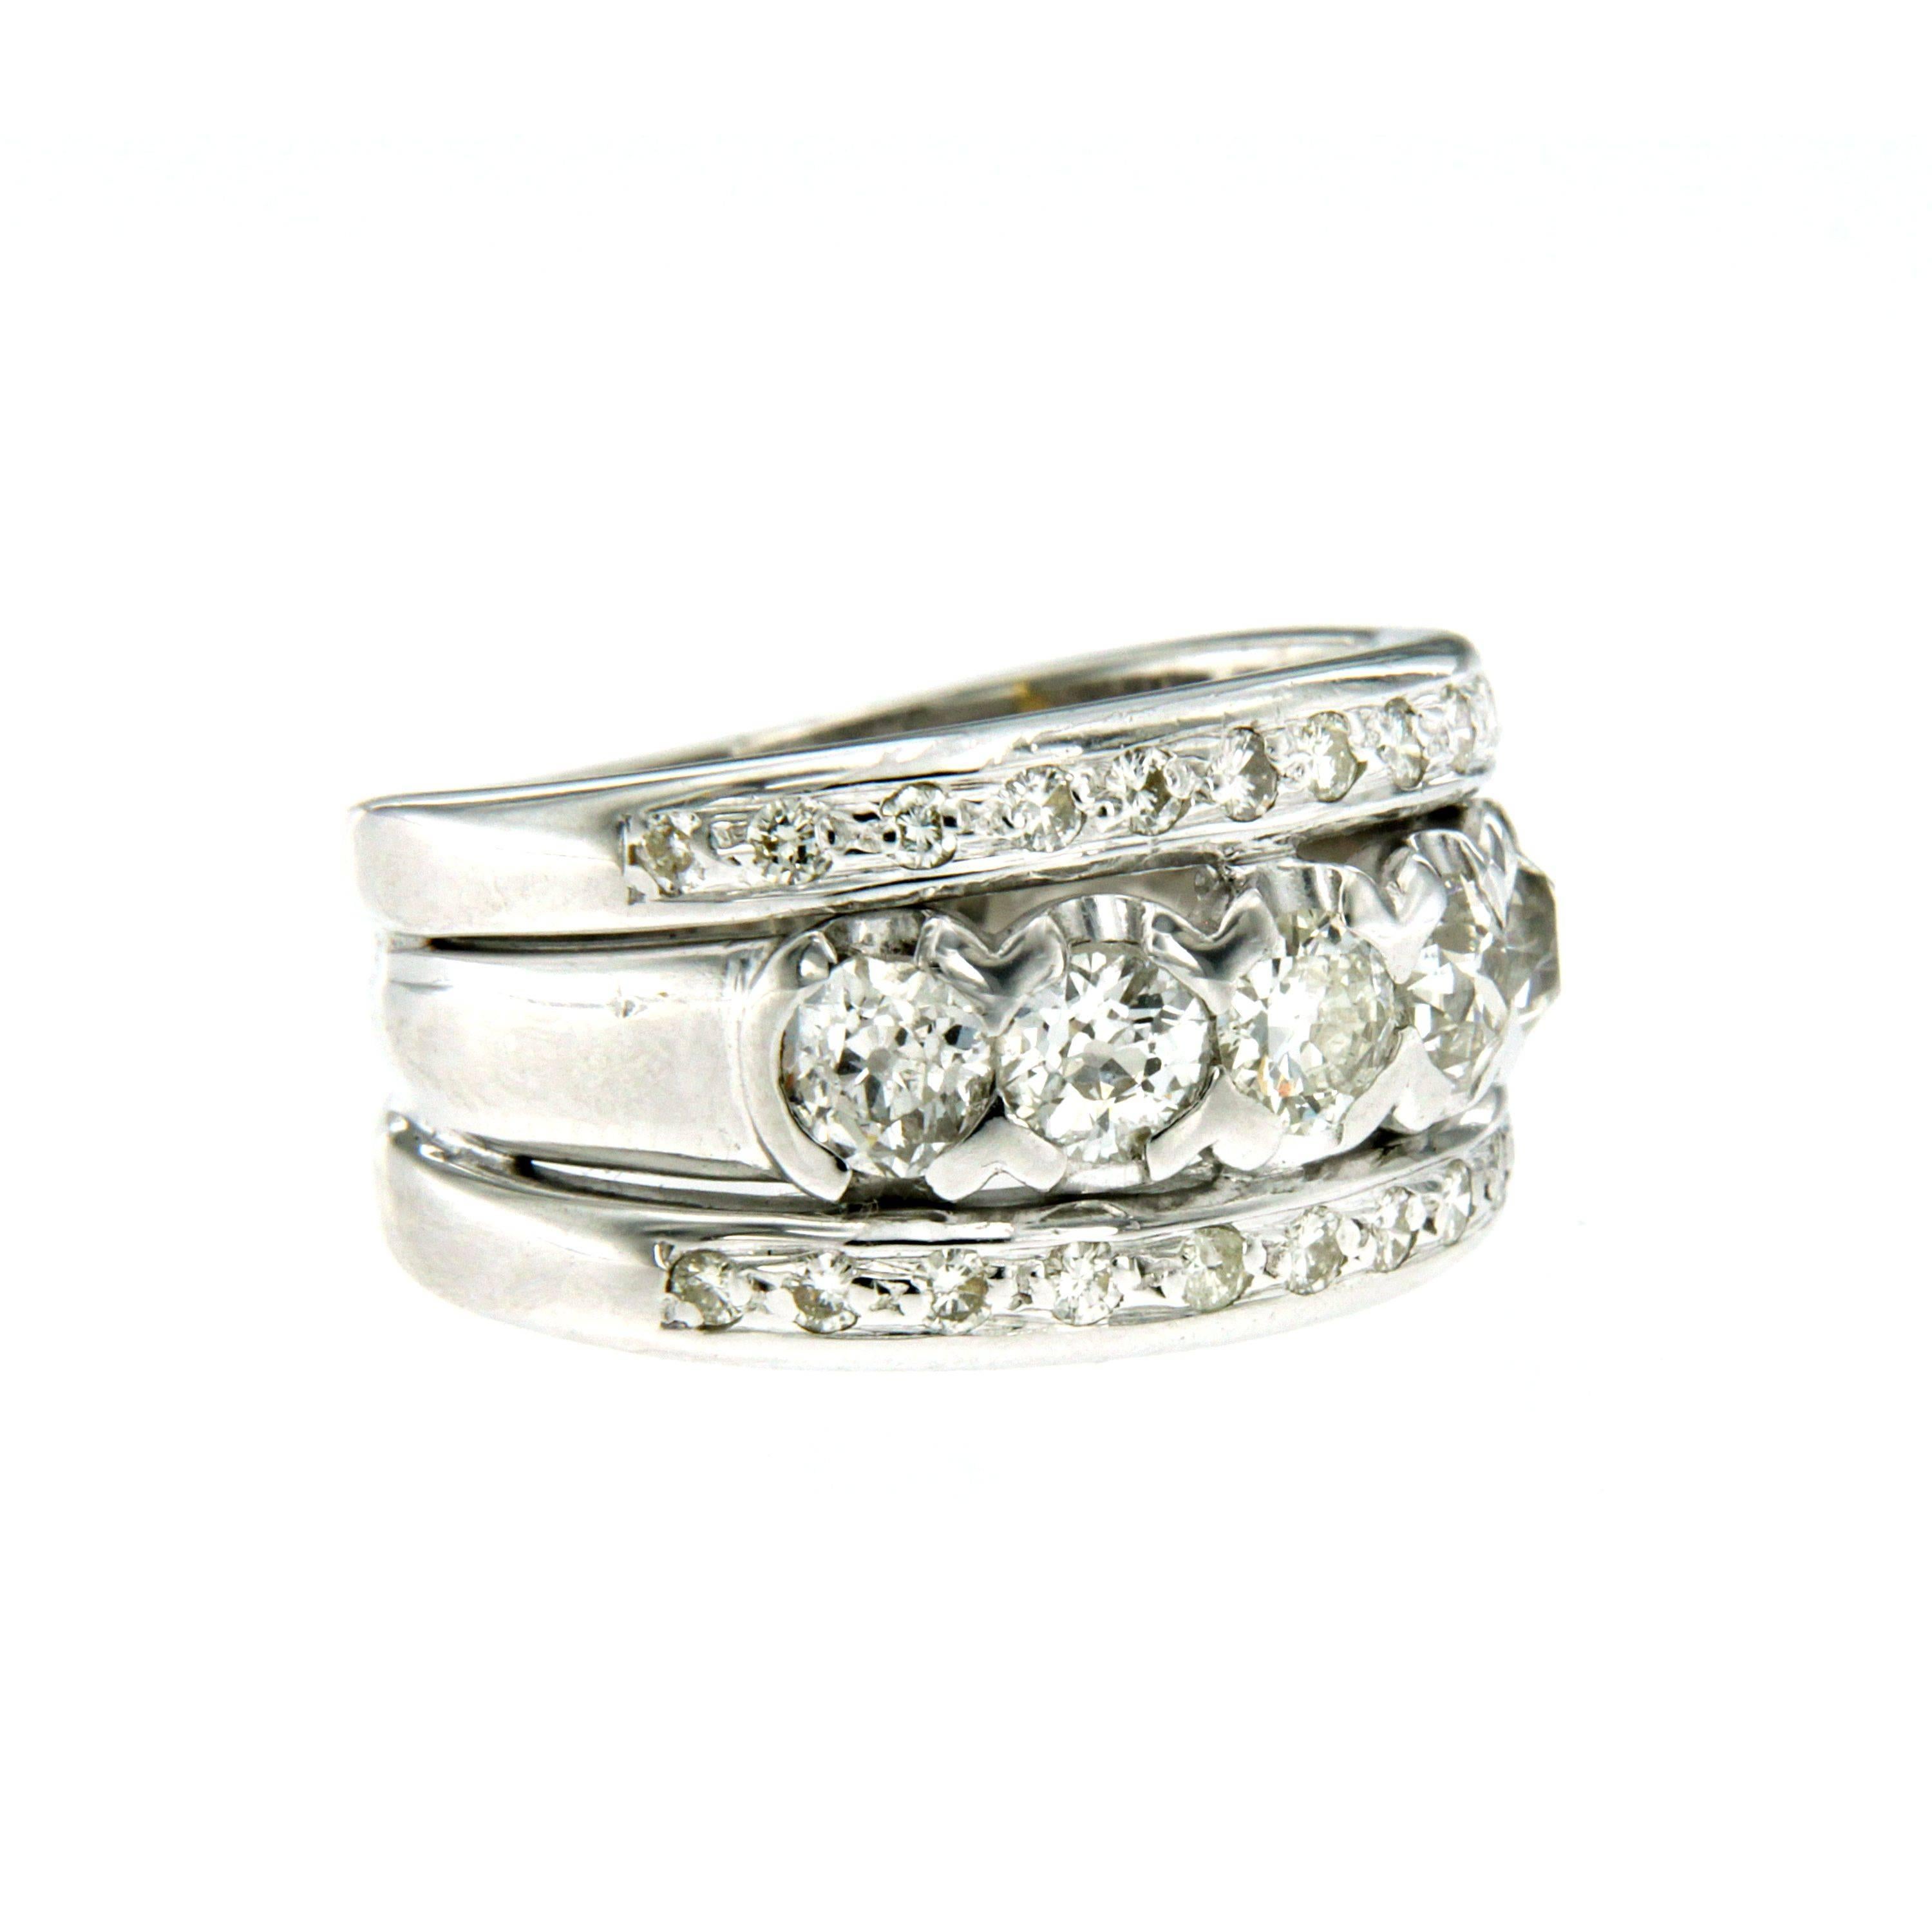 A vintage diamond band ring set in 18k white gold. The ring features total 1.50 carat round brilliant cut diamond graded H color Vs clarity, simple but luxurious, it's perfect for everyday wear.
Entirely hand crafted, dates to the 1980s, Italy, and